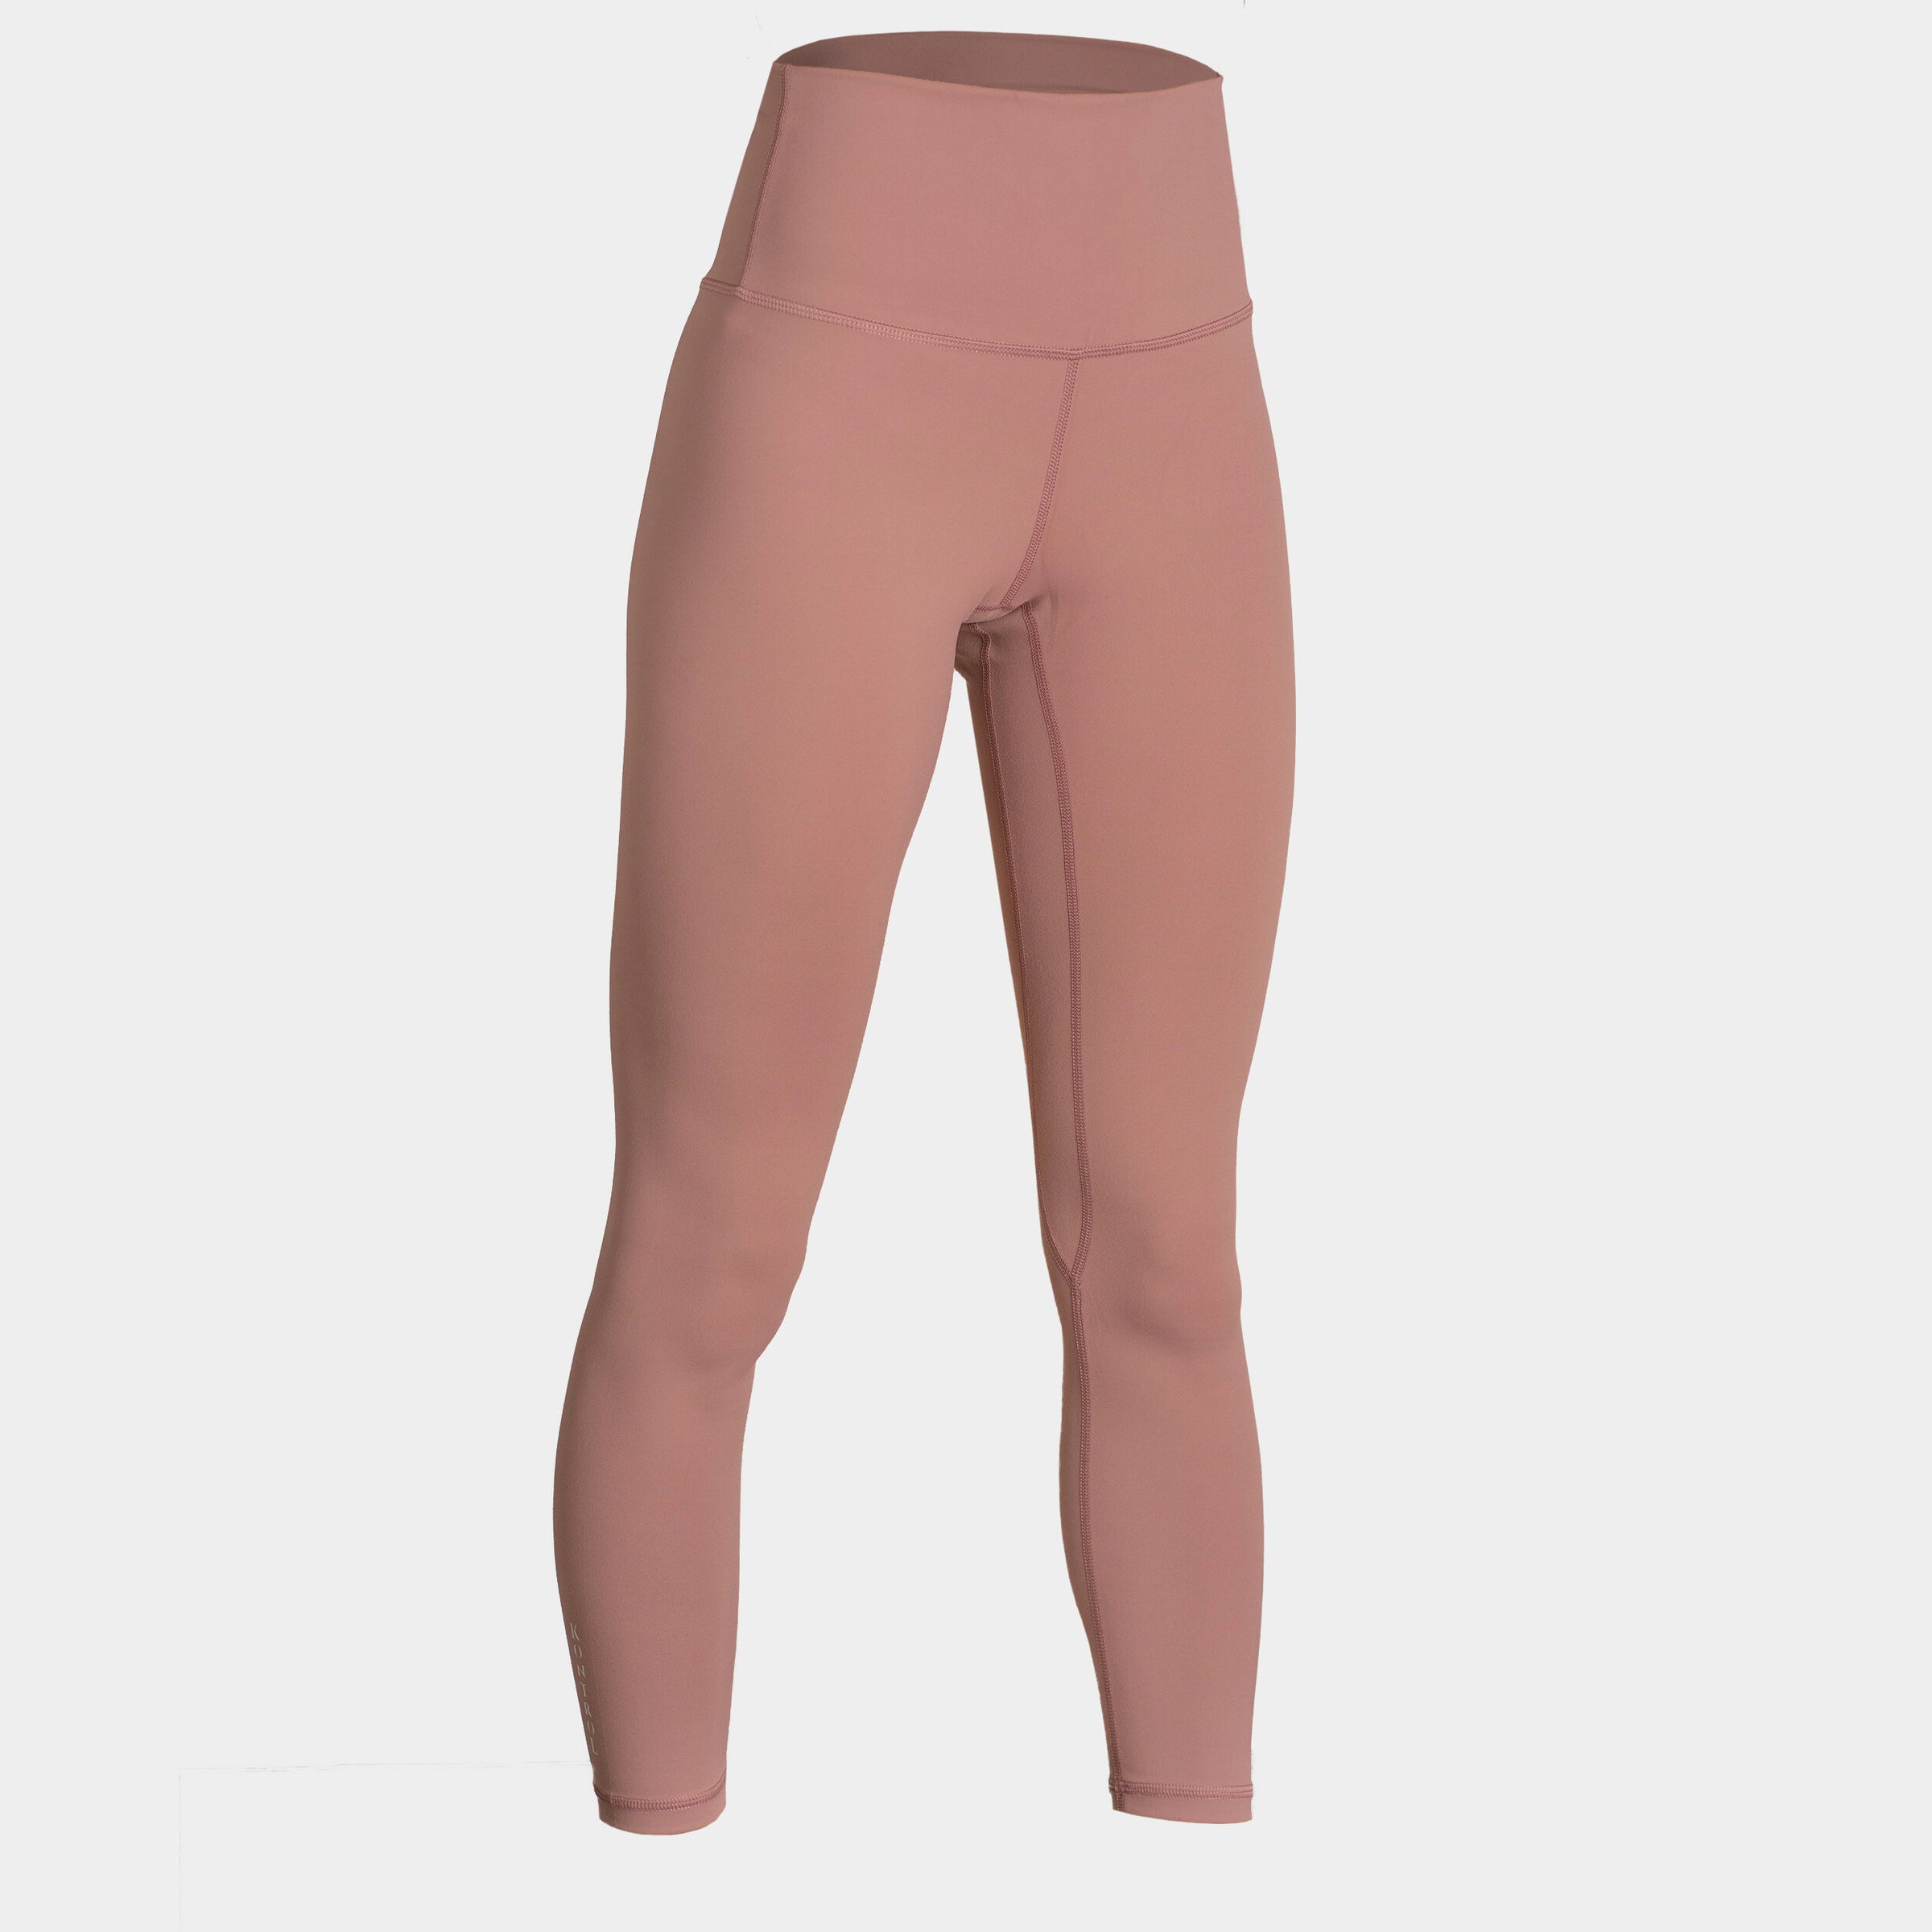 FabD Boutique - Birdie's Butter Soft Leggings *Final Sale*. Birdie's Butter  Soft Leggings will be your new favorite this fall. Birdie is buttery soft,  stretchy and super comfy! Our model is shown